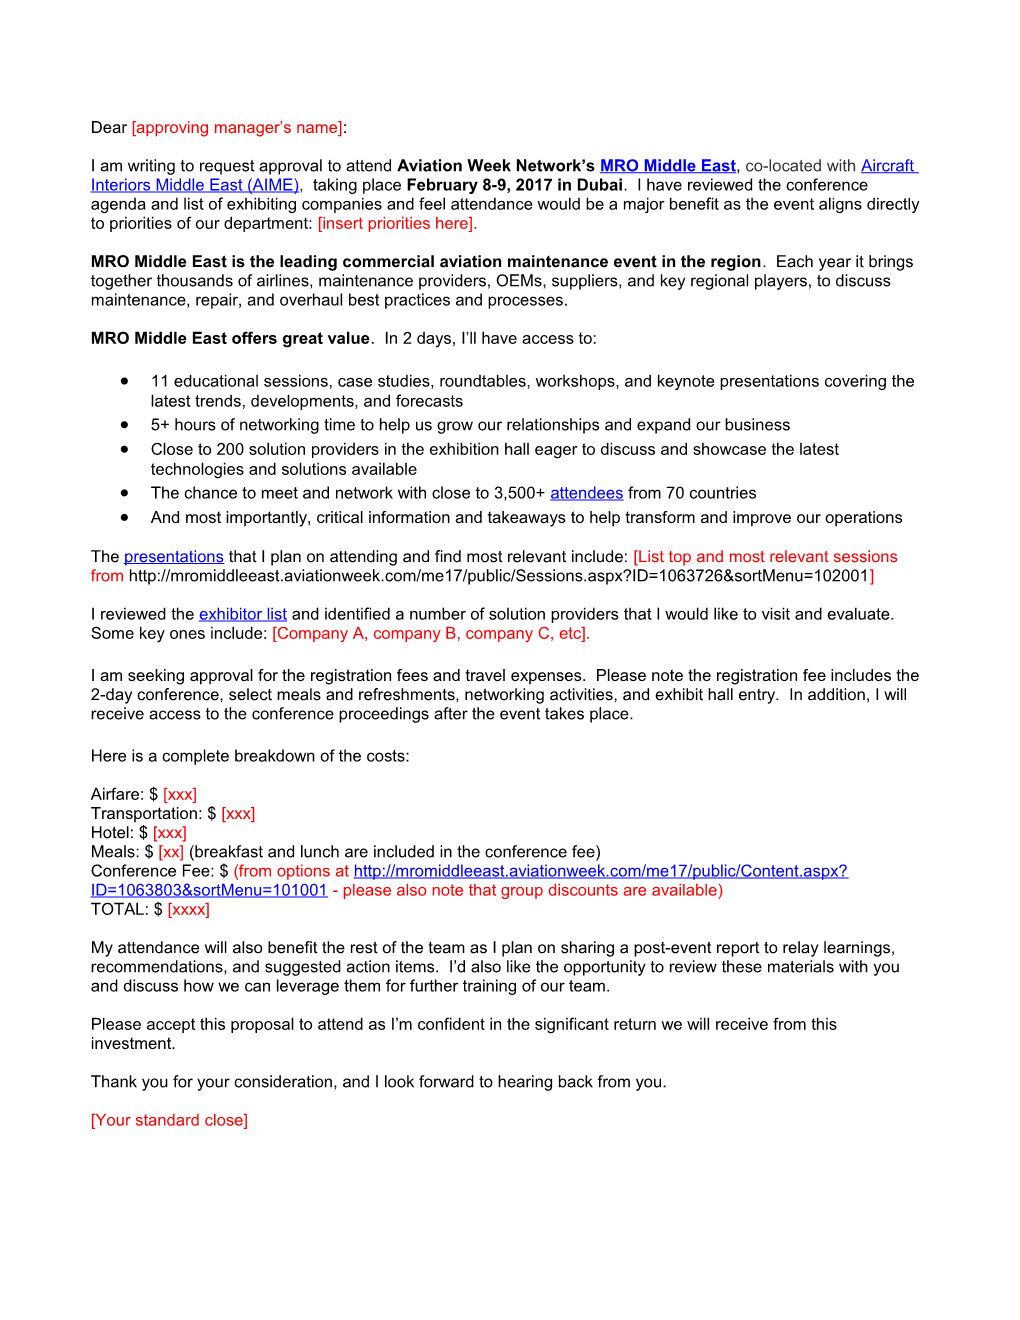 MRO Middle East 2015 Attendance Justification Letter